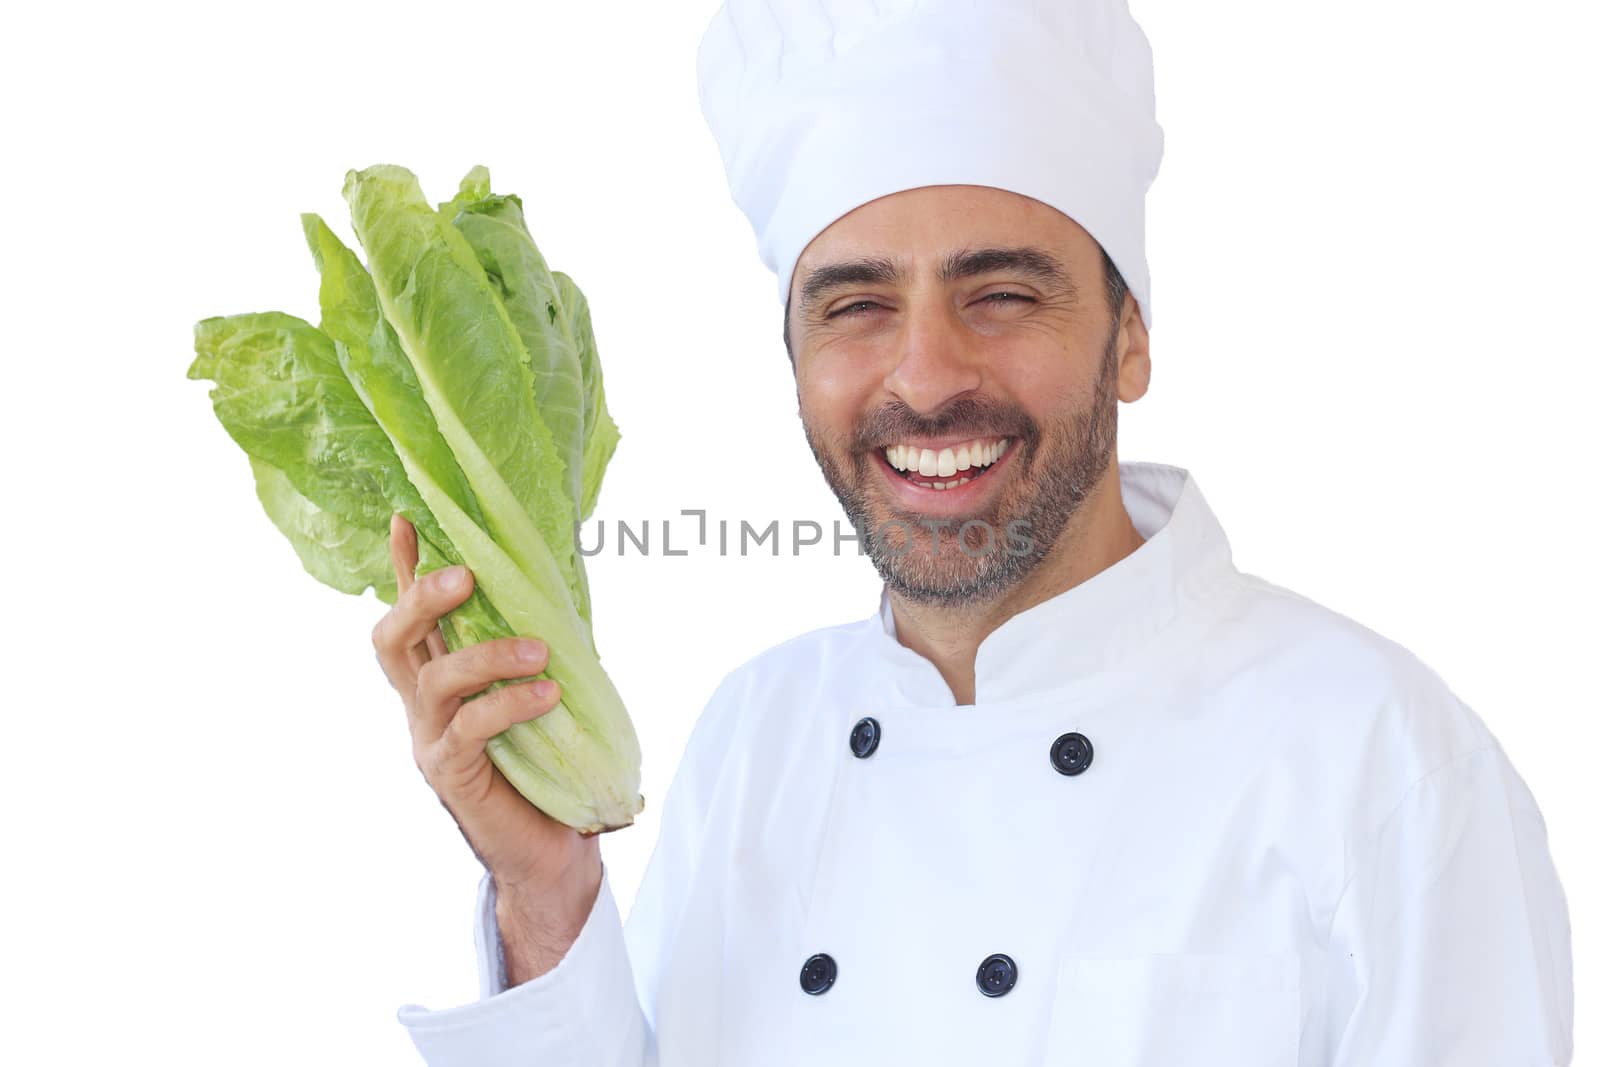 Laughing middle-aged cook or chef wearing a traditional white uniform and toque holding a fresh healthy green lettuce isolated on white